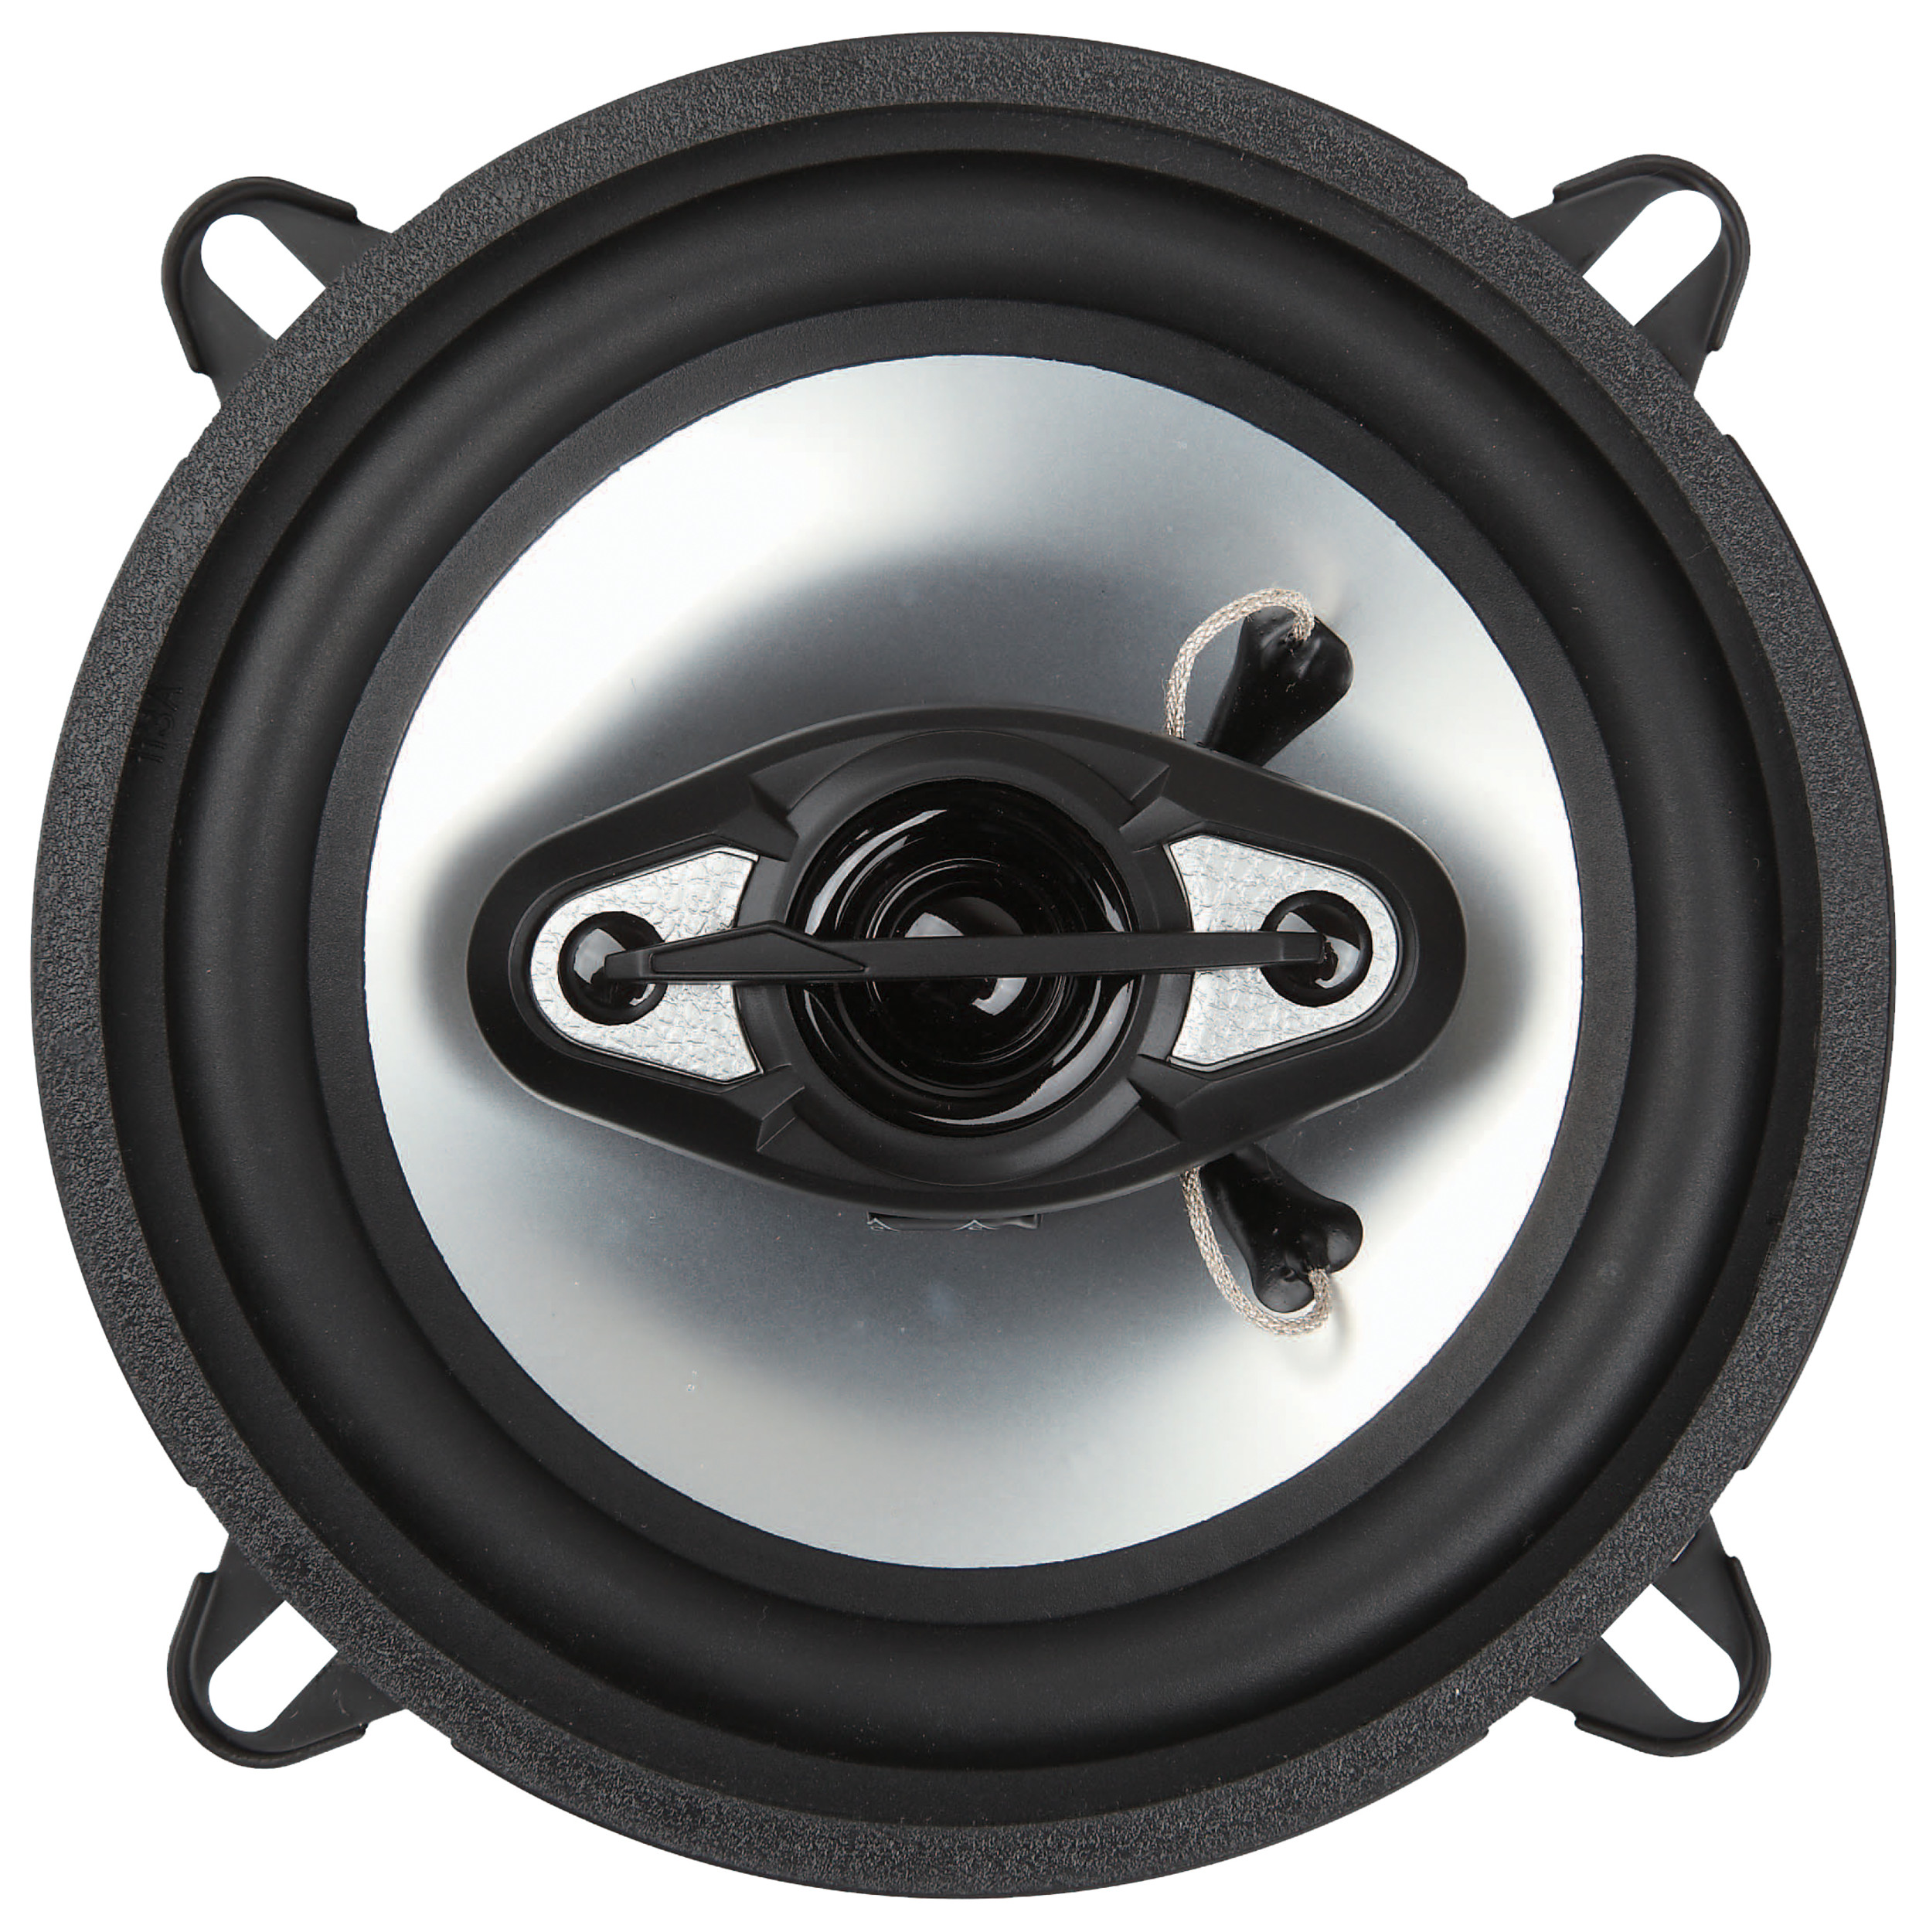 BOSS NX524 5.25" 300W & 6.5" 400W 4 Way Car Audio Coaxial Speakers (4 Pack) - image 5 of 10